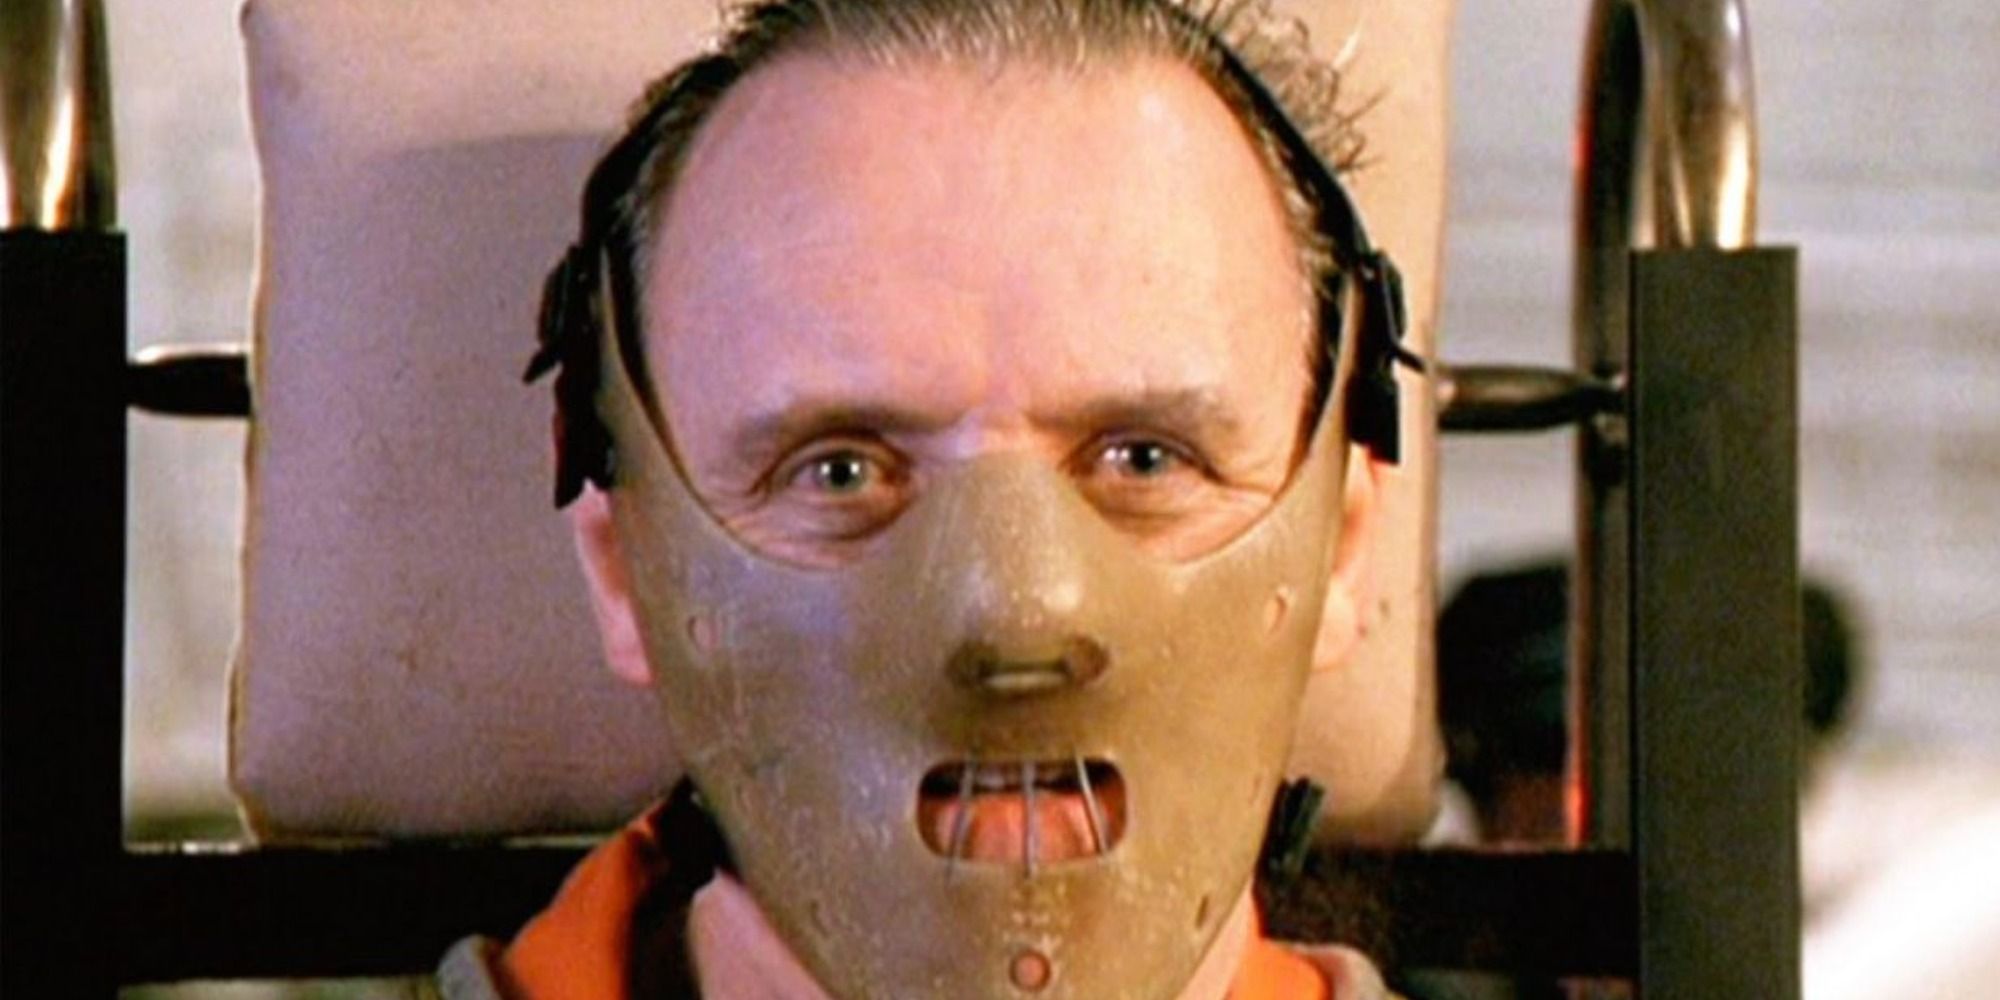 Hannibal wears a mask in The Silence Of The Lambs